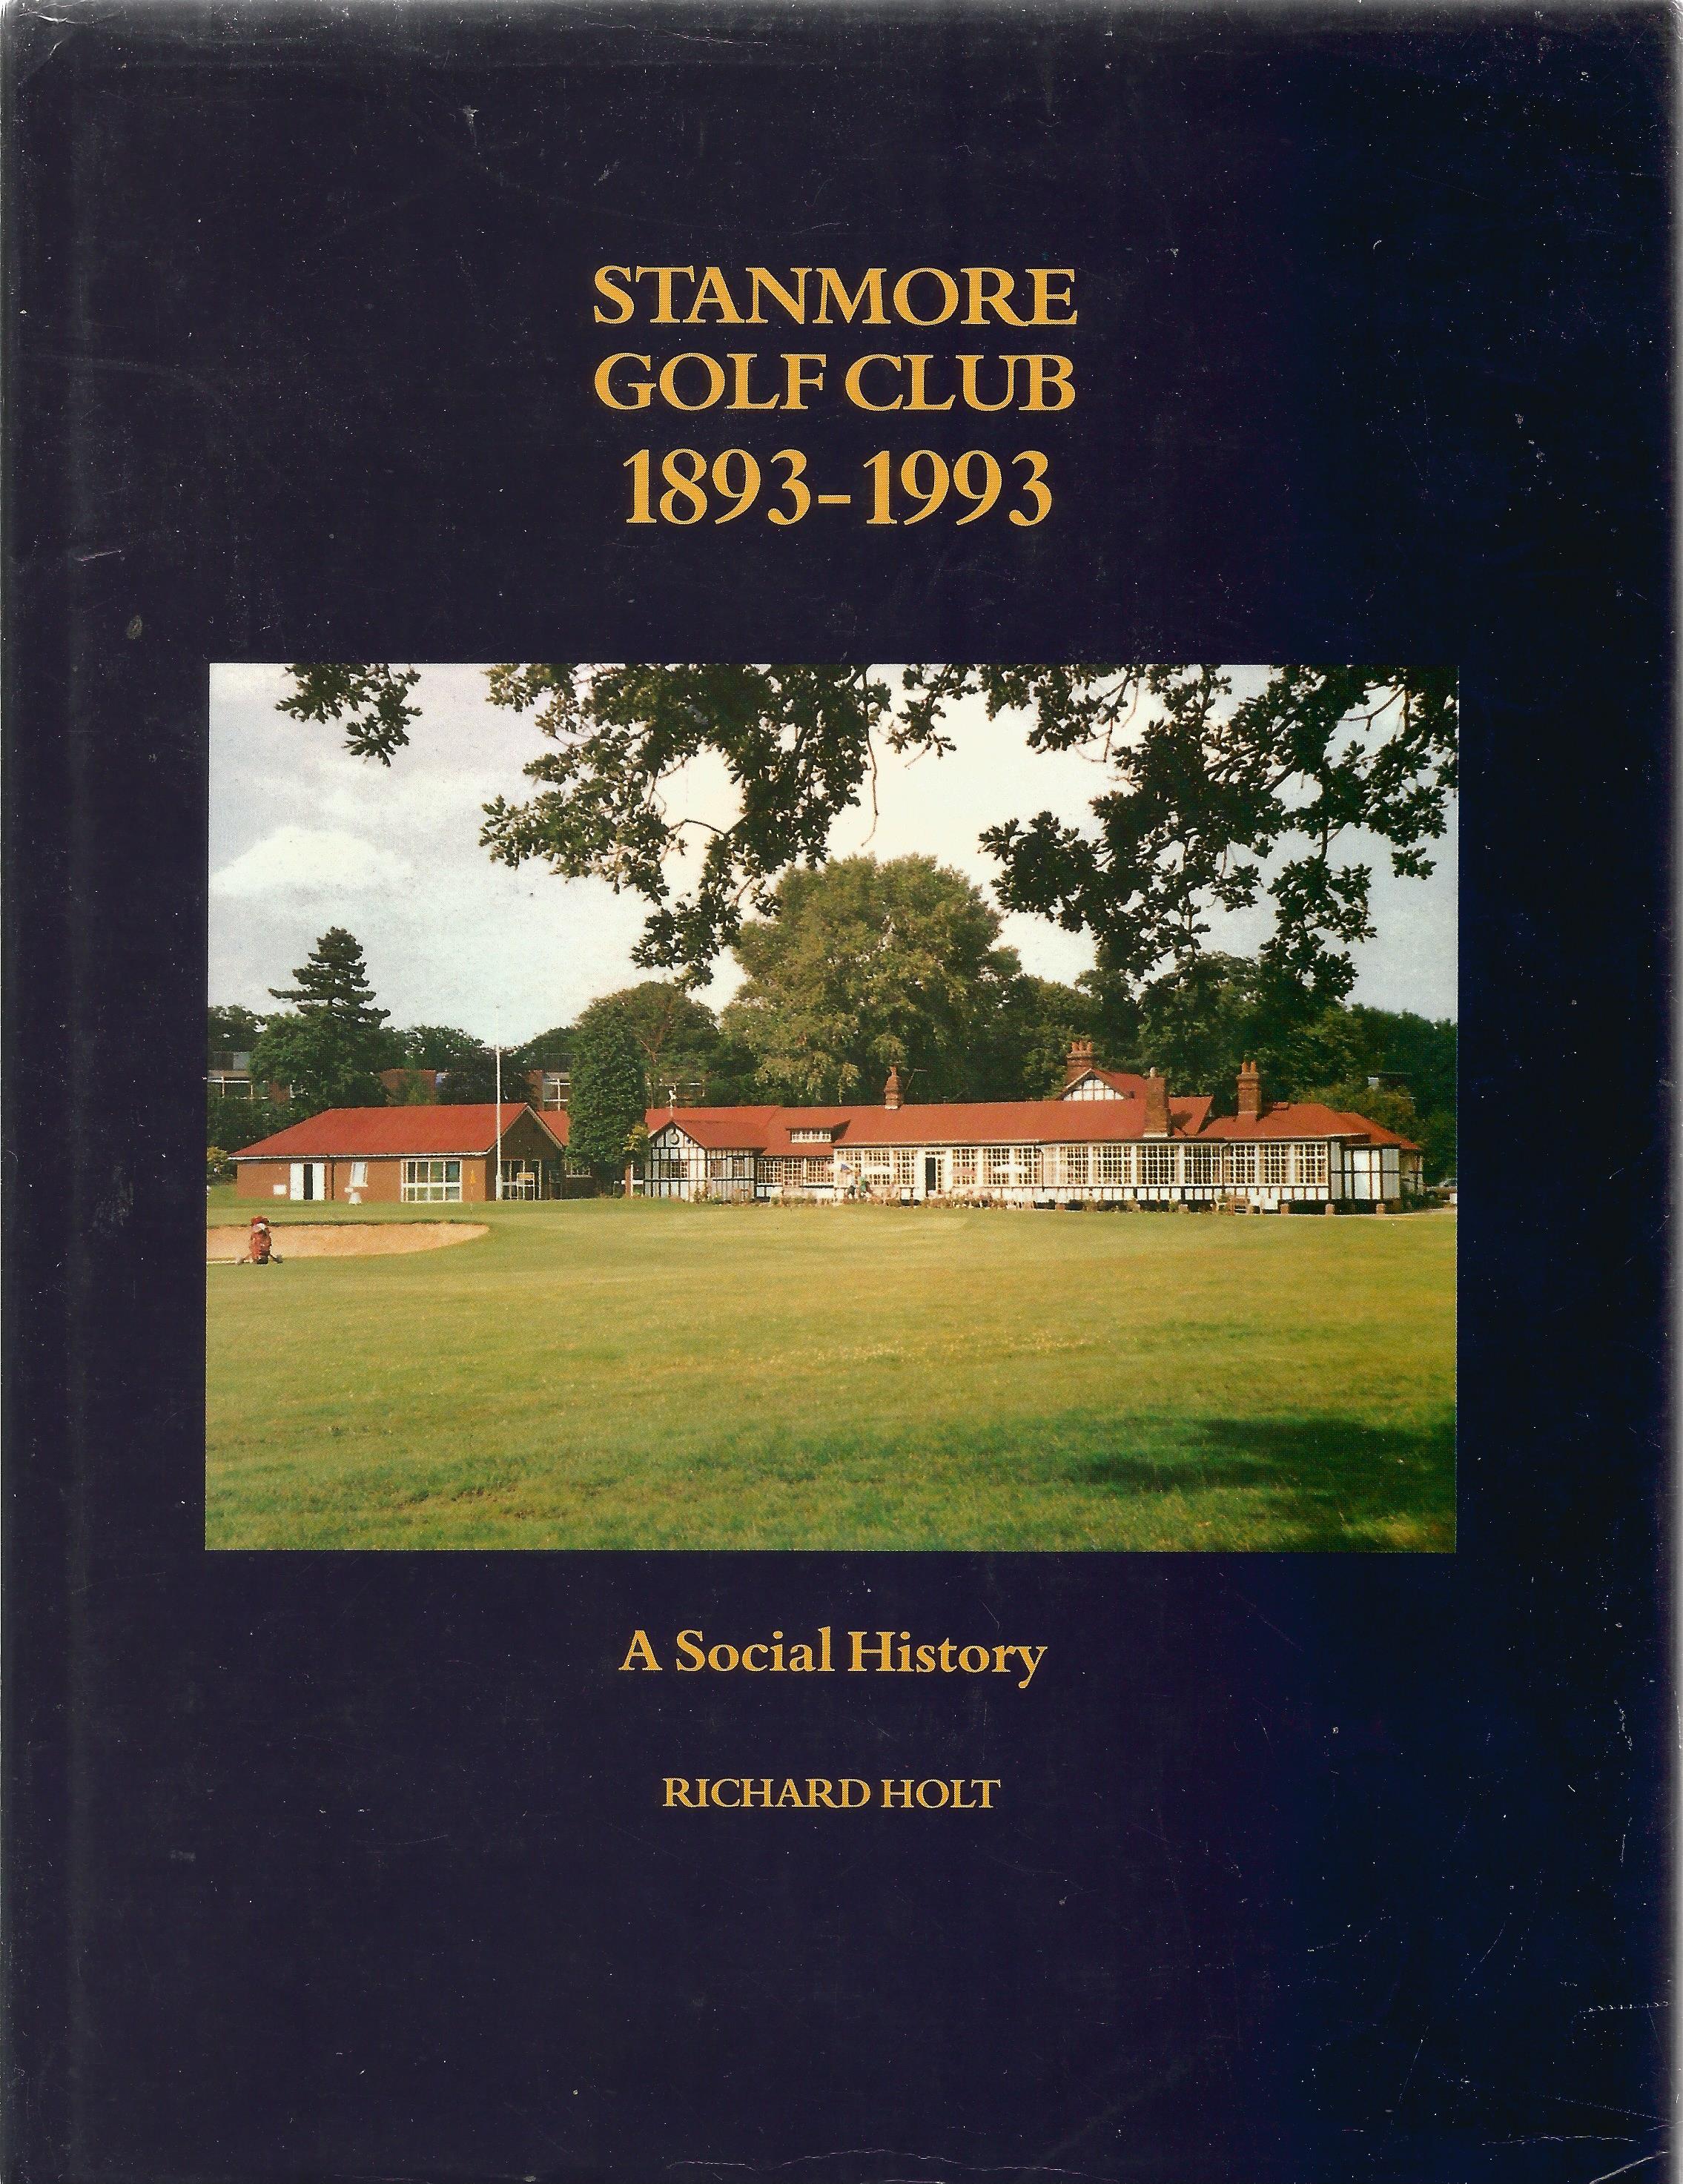 Richard Holt hardback book Stanmore Golf Club 1893-1993 First Edition 1993 published by Stanmore